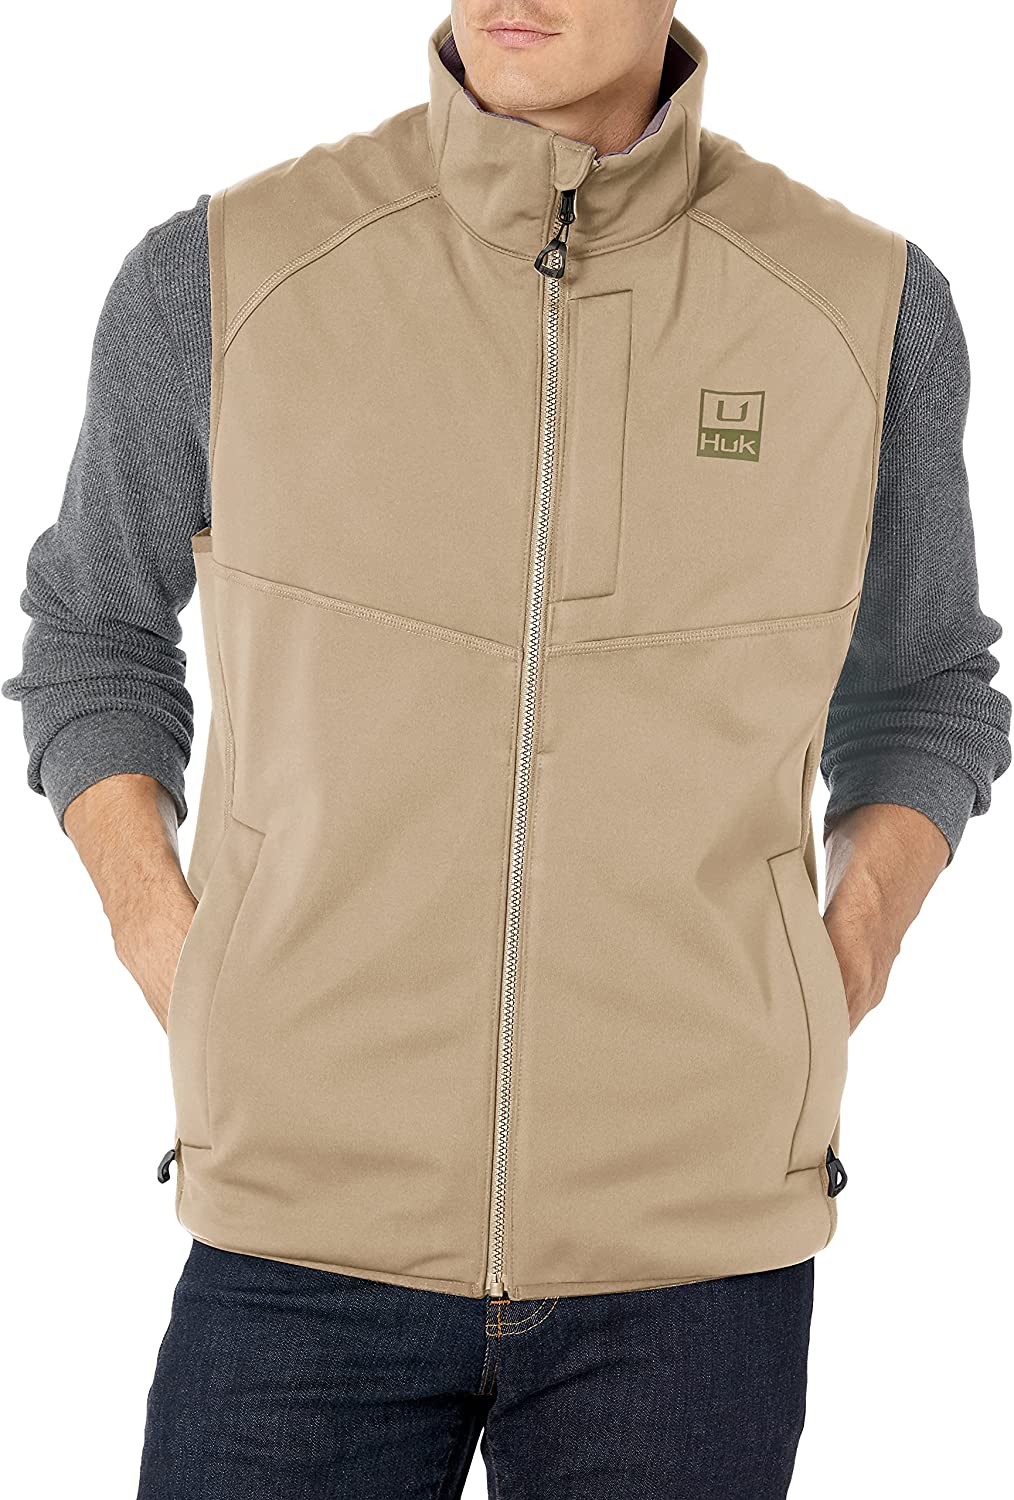 HUK Men's Icon X Soft Shell Windproof & Water Resistant Vest | eBay